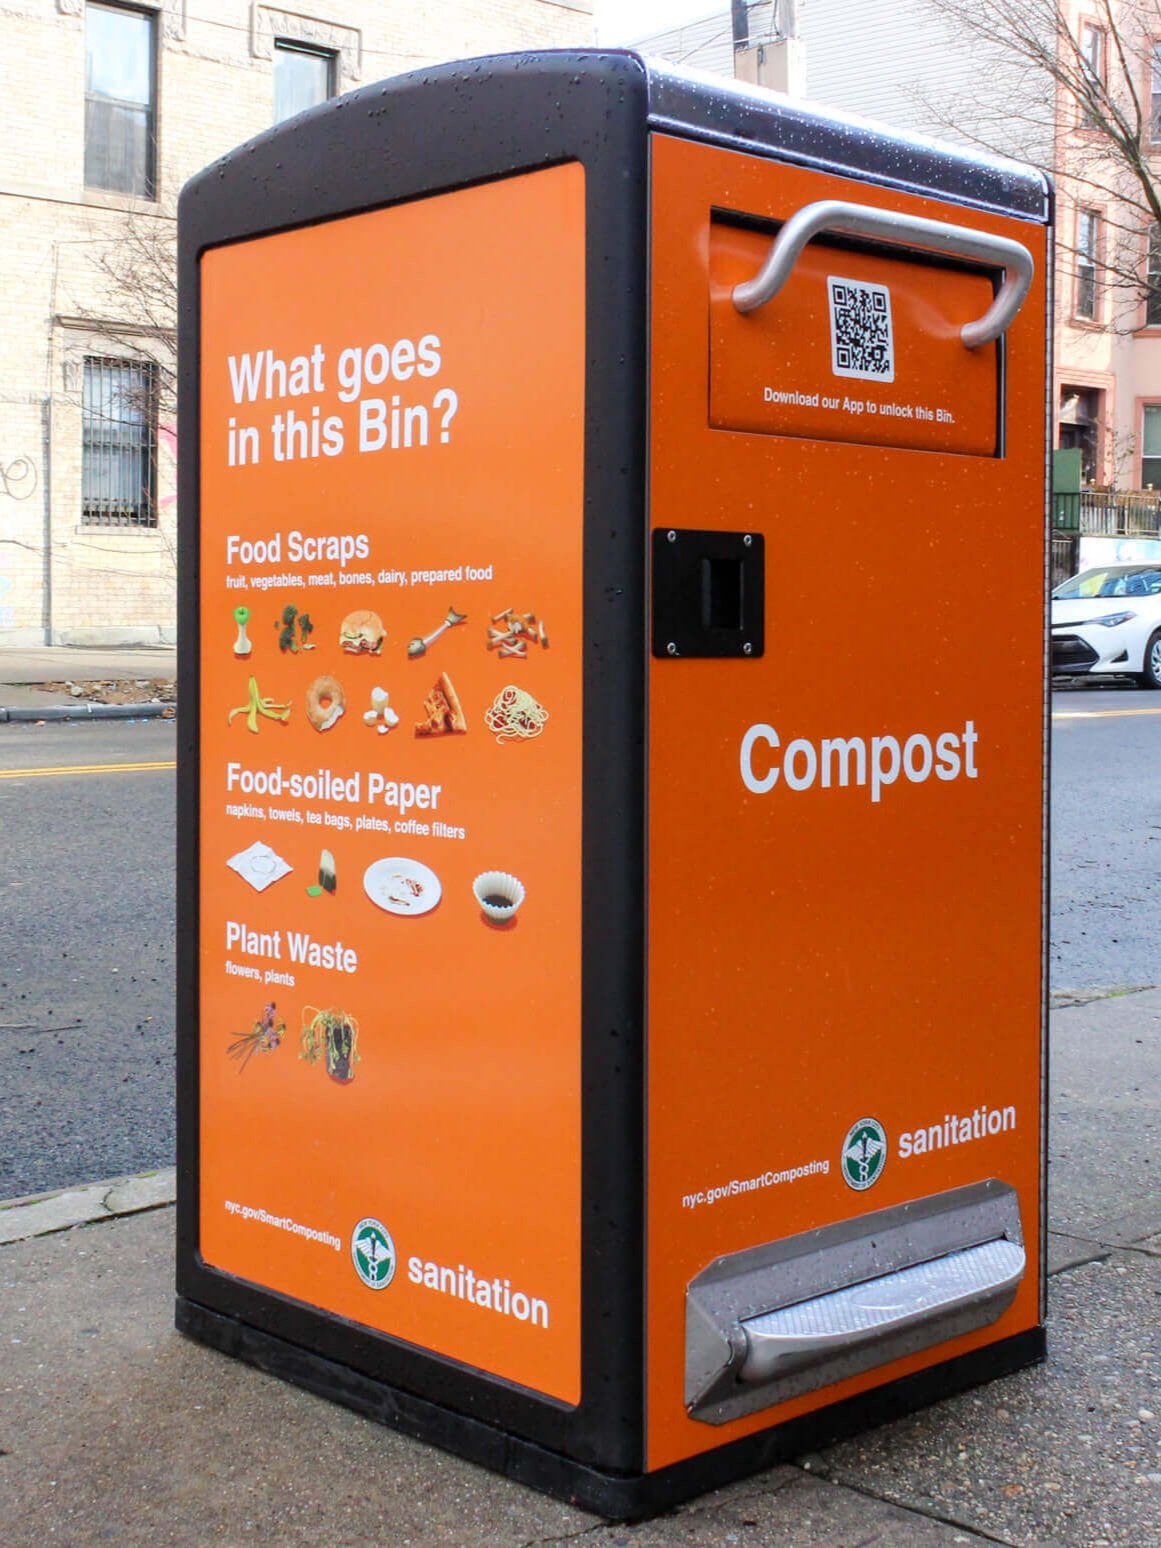 More info about Smart Bins